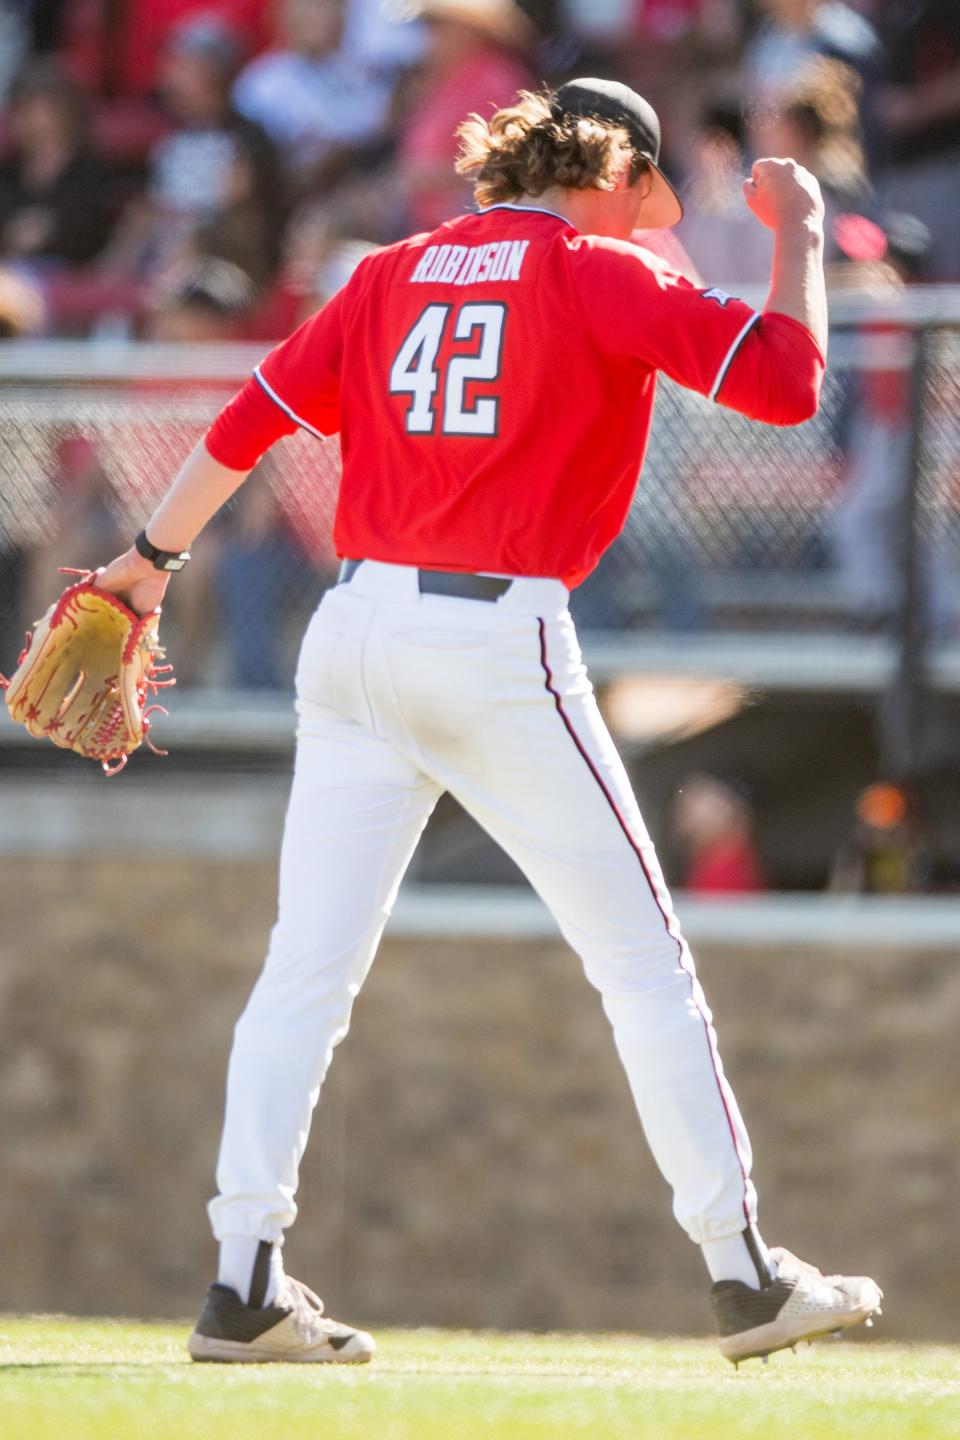 Texas Tech pitcher Kyle Robinson, shown in a 2023 game, struck out a career-high nine over seven innings to lead the Red Raiders to a 3-1 victory Sunday in a Big 12 series finale against No. 24 West Virginia. Tech handed WVU only its second loss by sweep in the Mountaineers' past 24 Big 12 series.